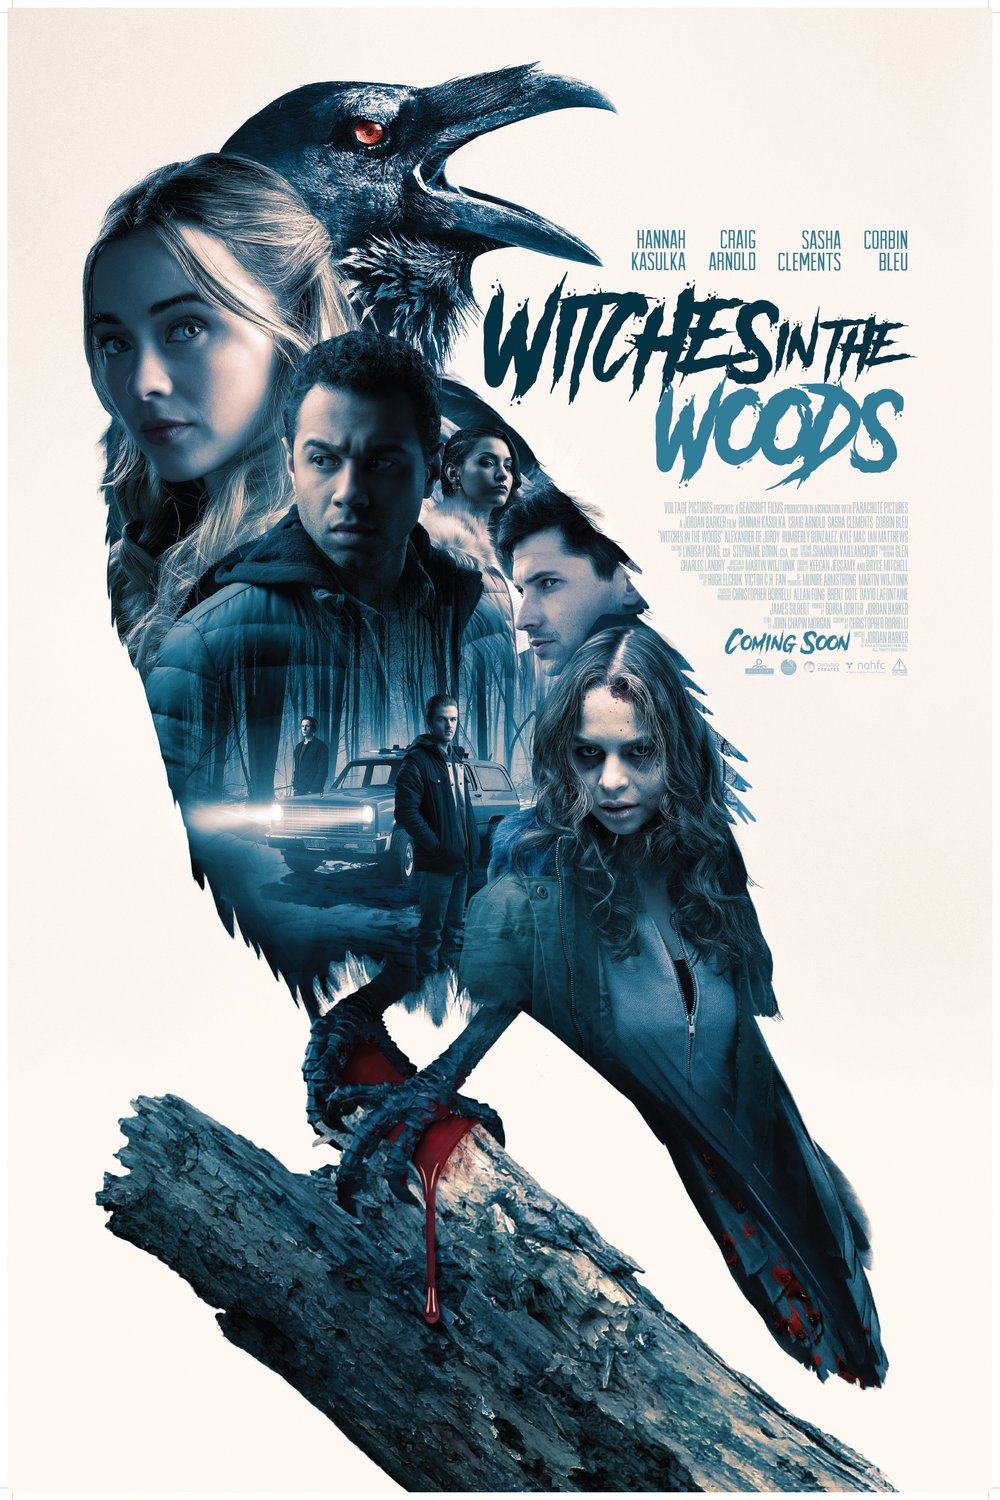 Poster of the movie Witches in the Woods